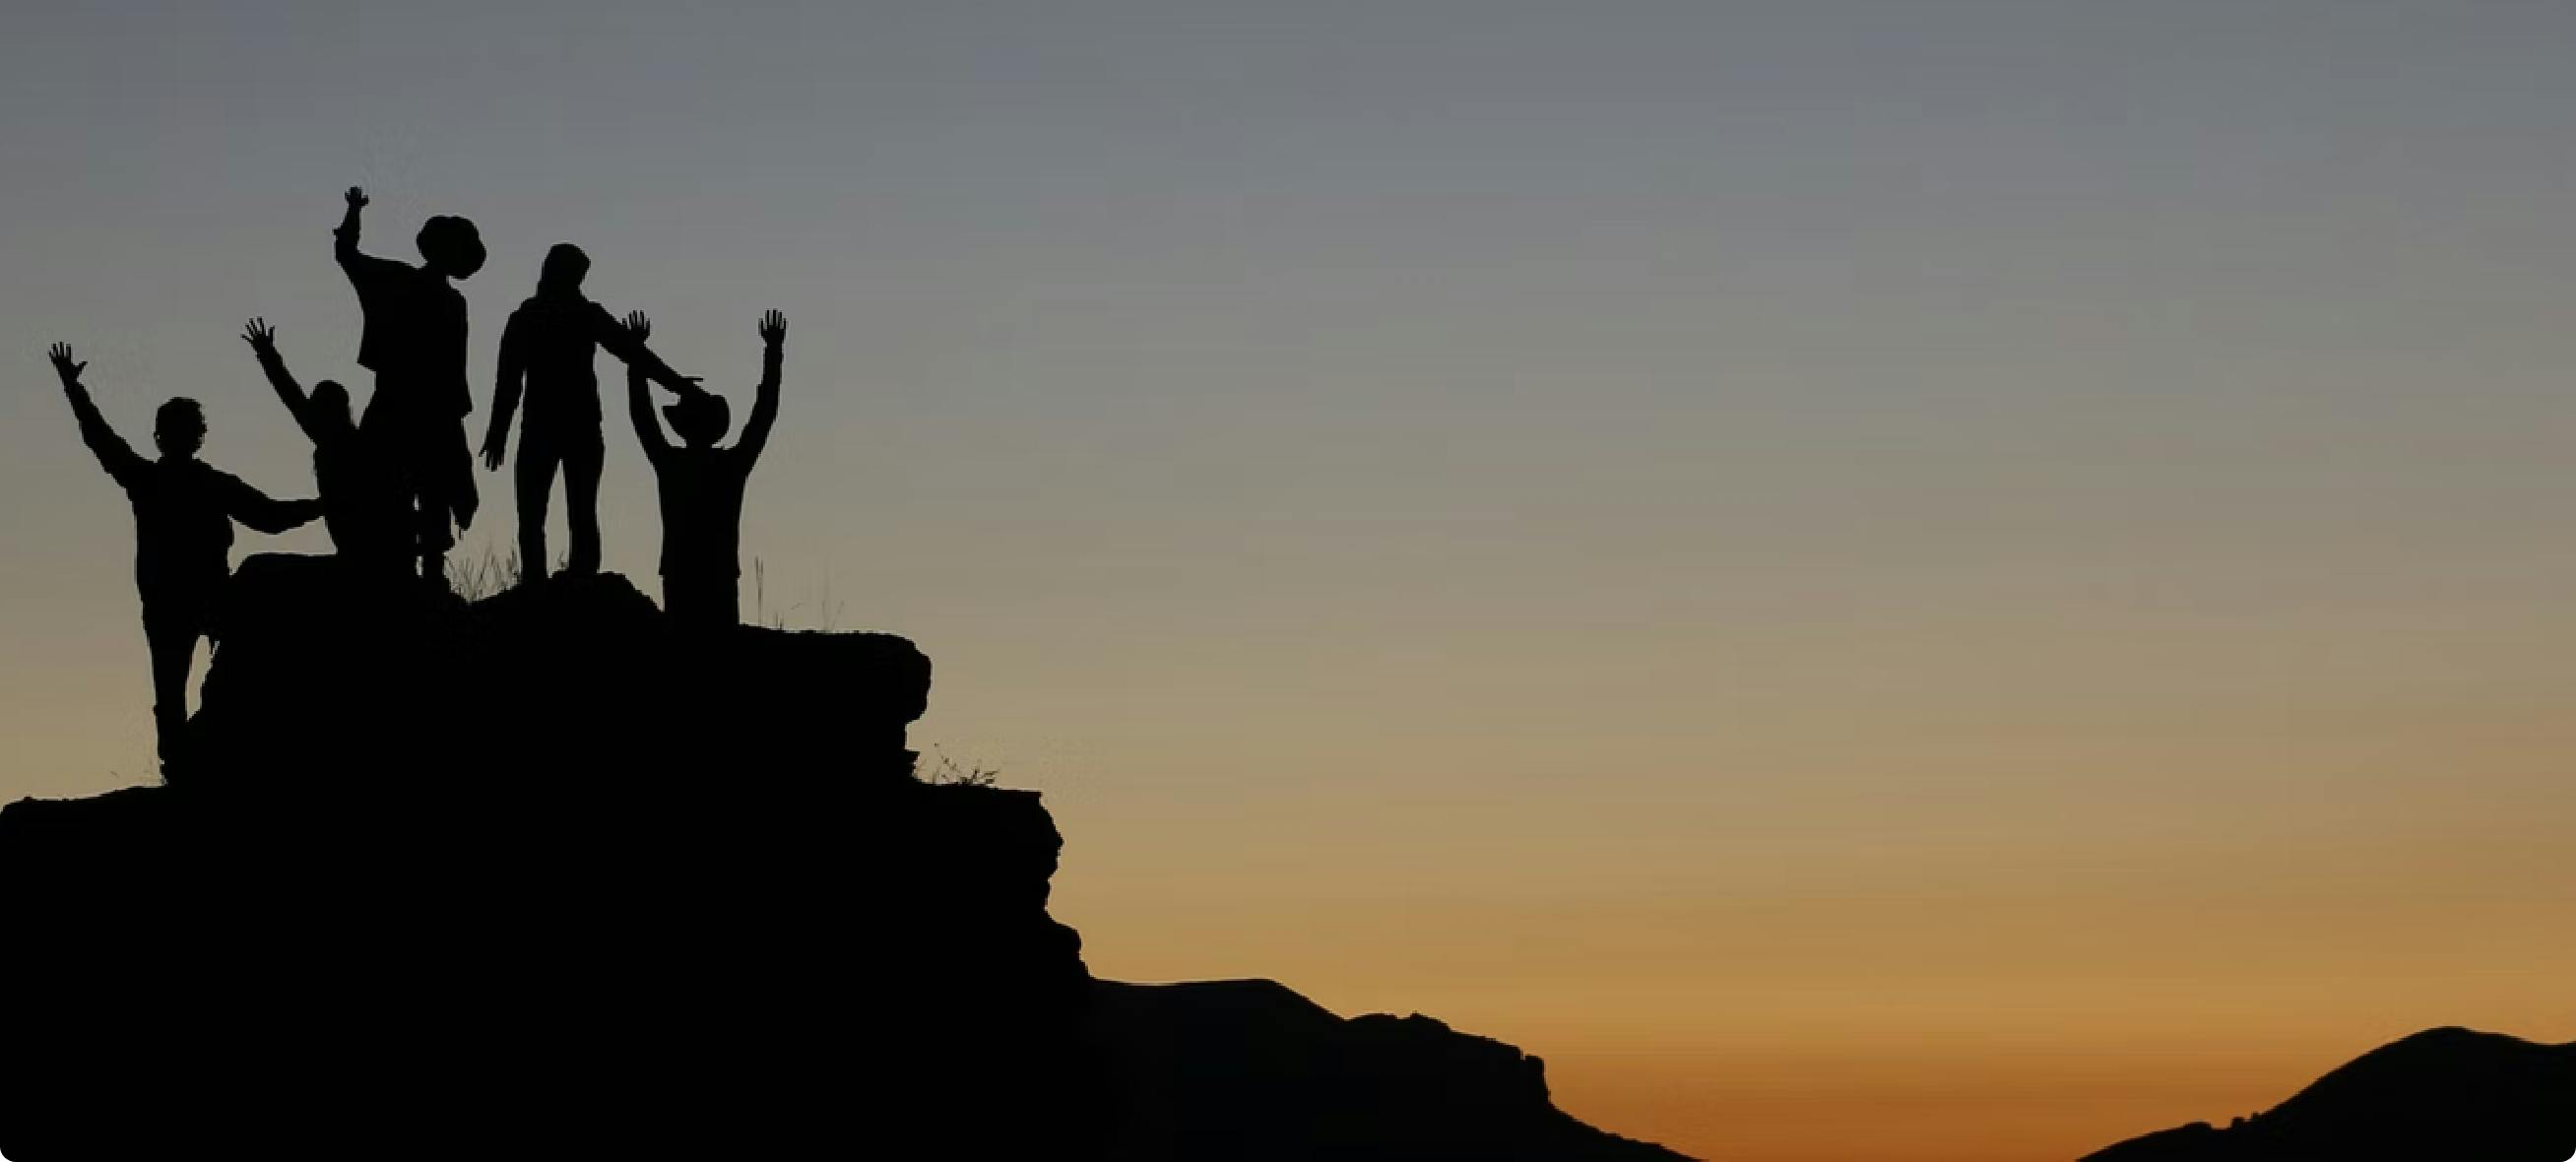 People from the top of a rock raising their arms under a sunset.